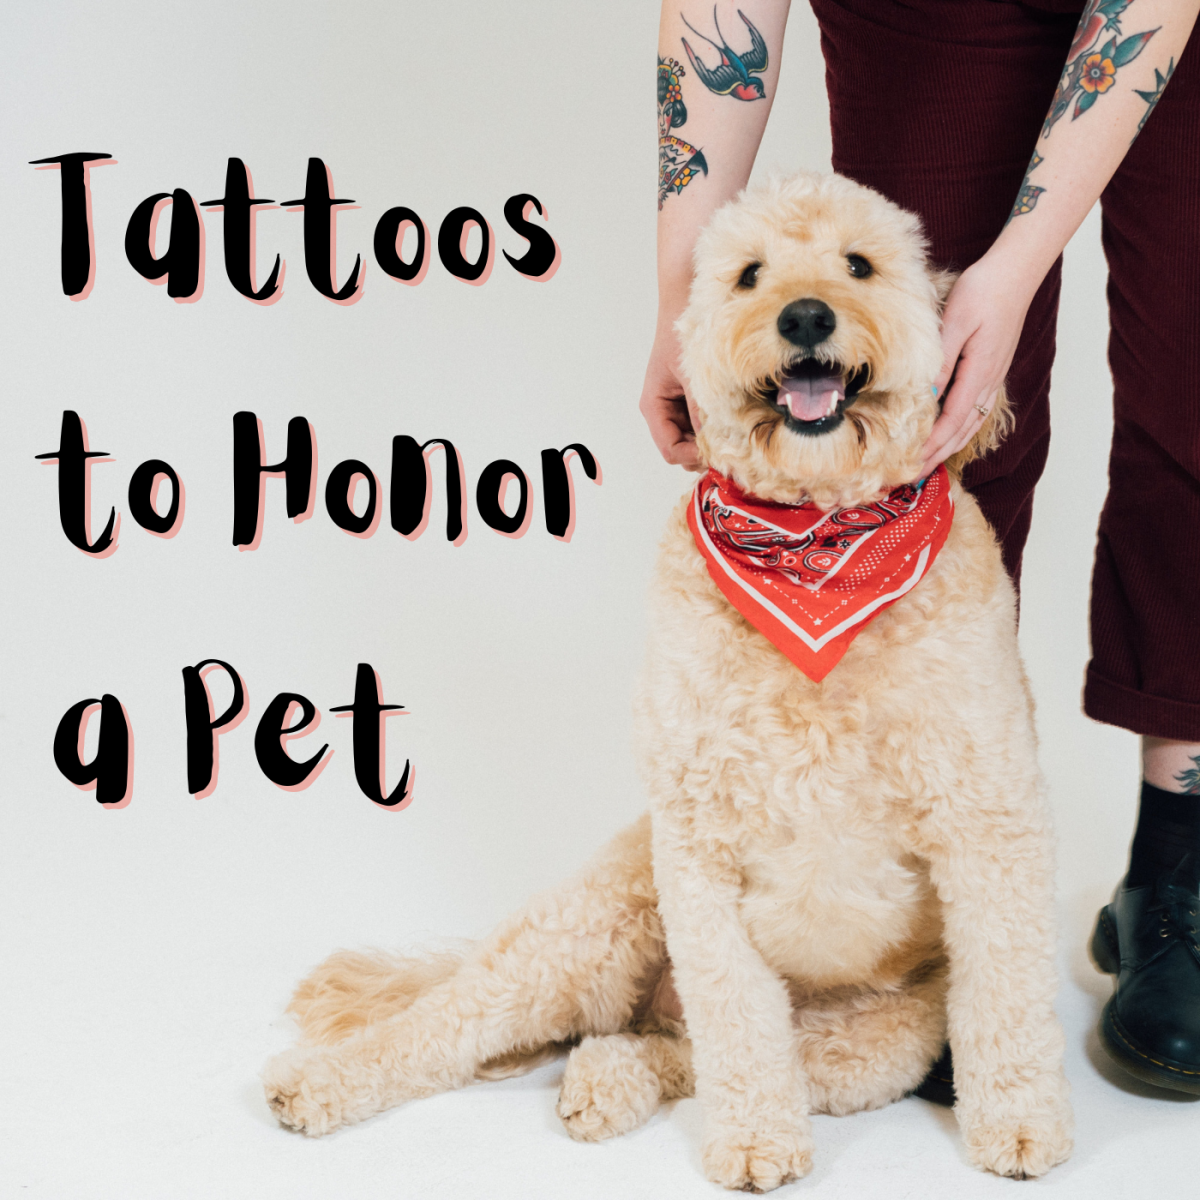 Here are quotes and ideas for pet remembrance tattoos.